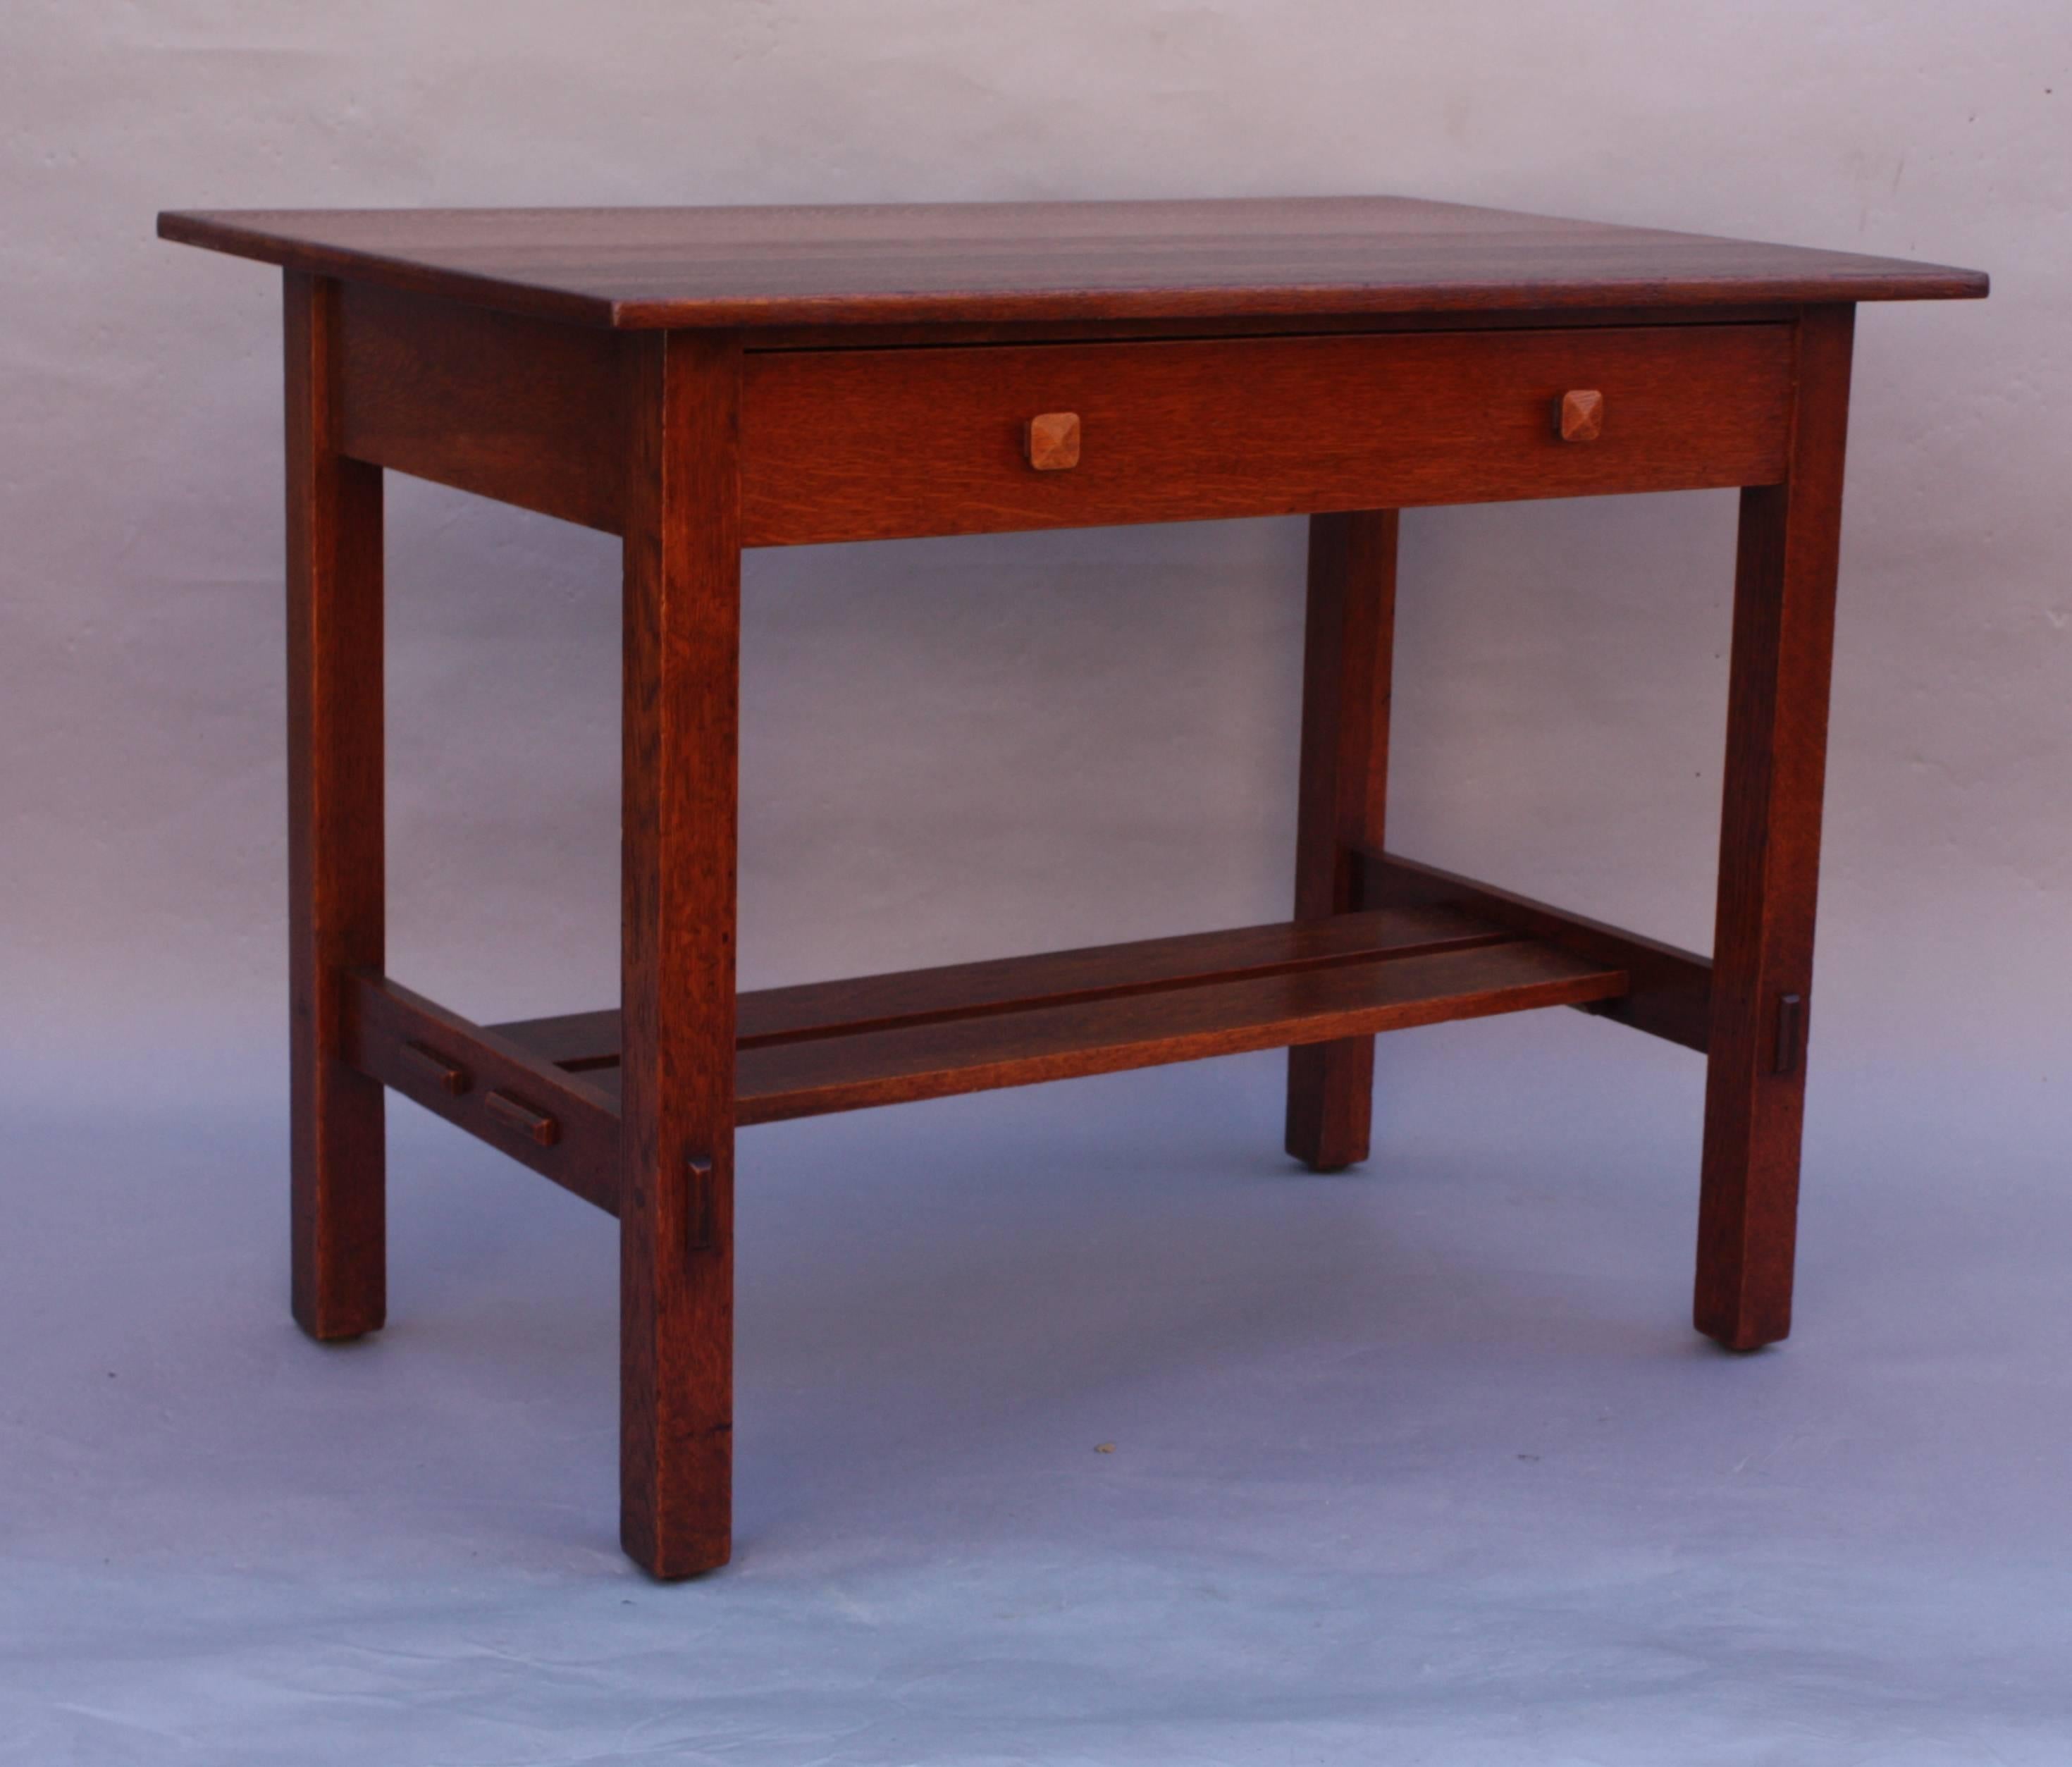 Arts and crafts desk with single drawer, circa 1910. Double stretchers. Pinned construction. Quarter sawn oak. Restored finish.